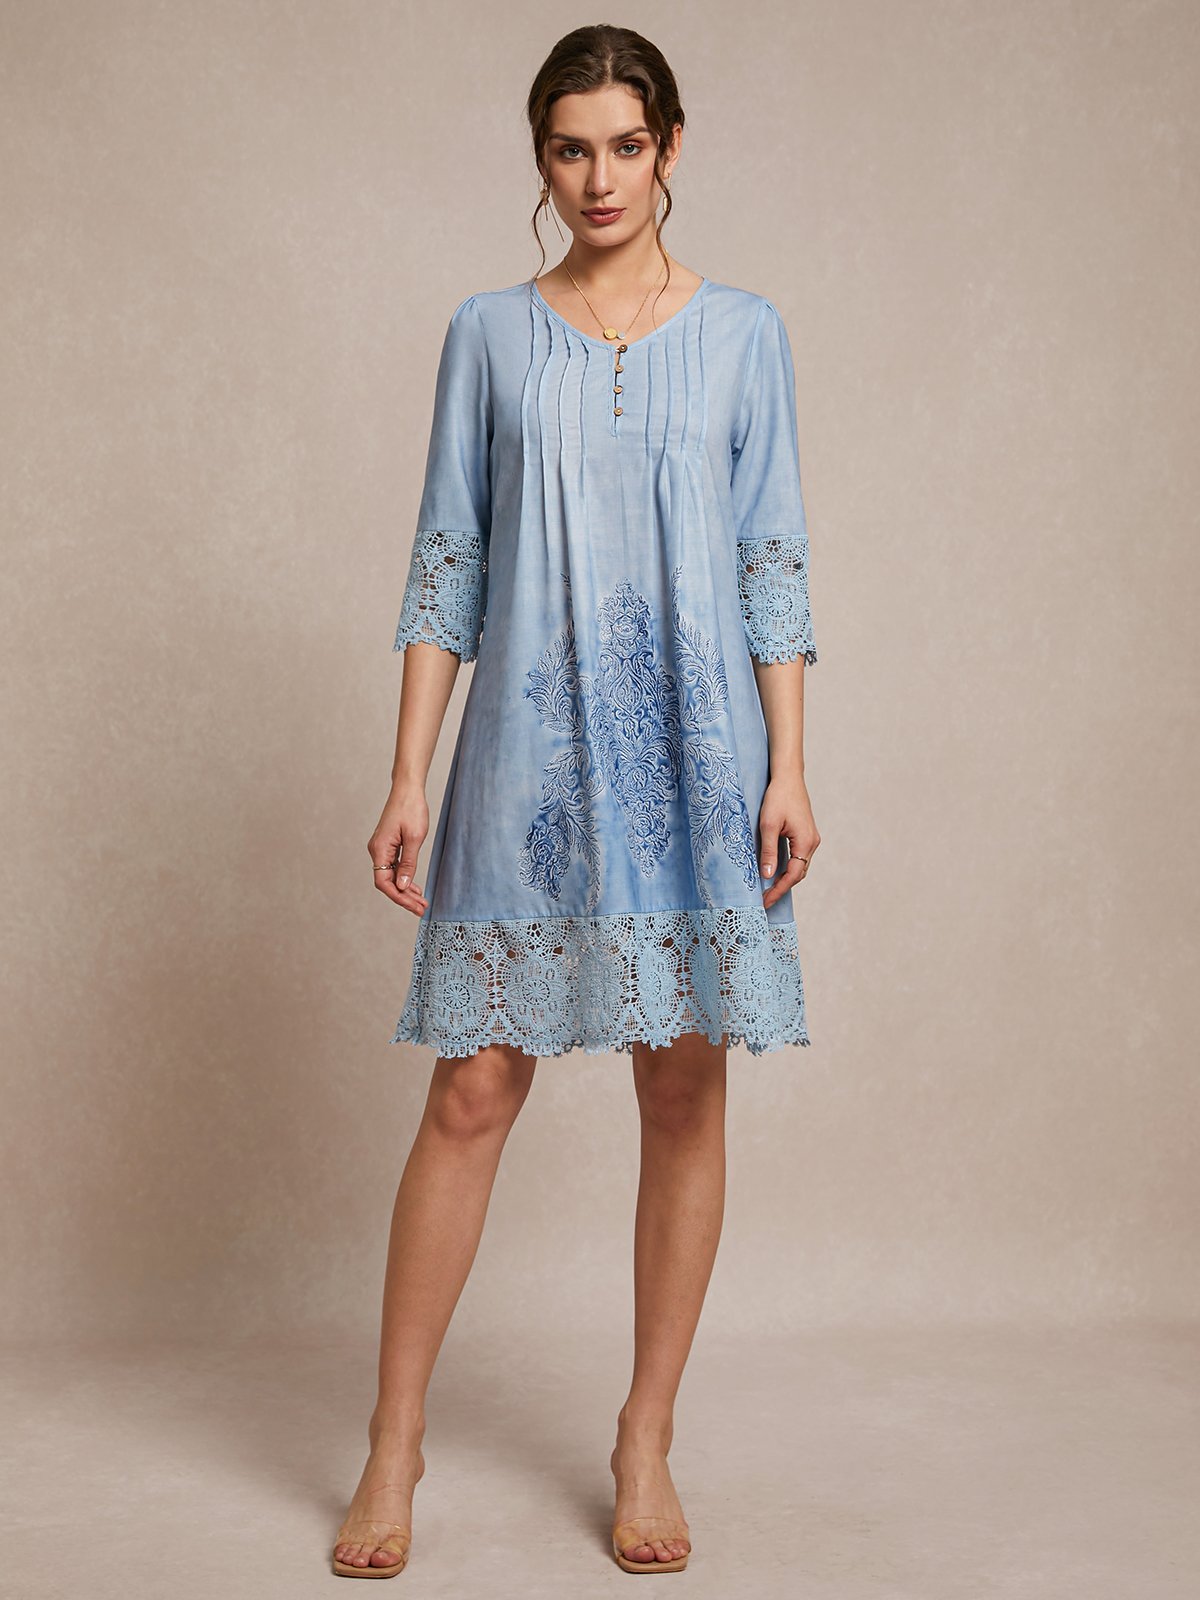 V Neck Casual Jersey Lace Edge Dress